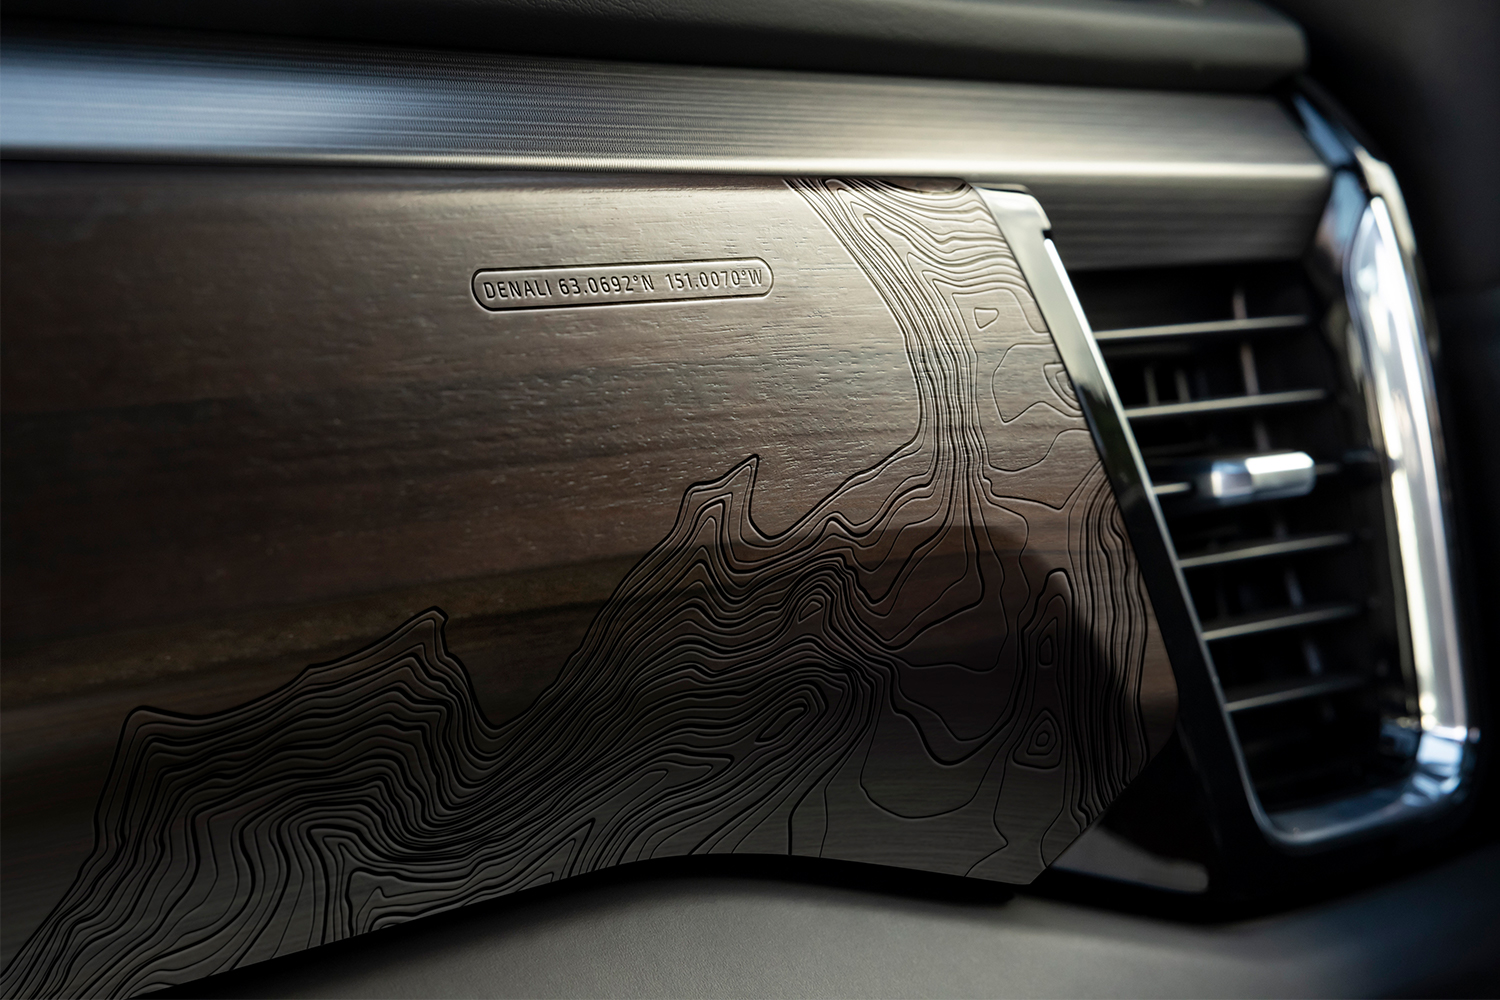 Topographical lines and GPS coordinates for Denali engraved into the wood dashboard of the GMC Sierra Denali Ultimate